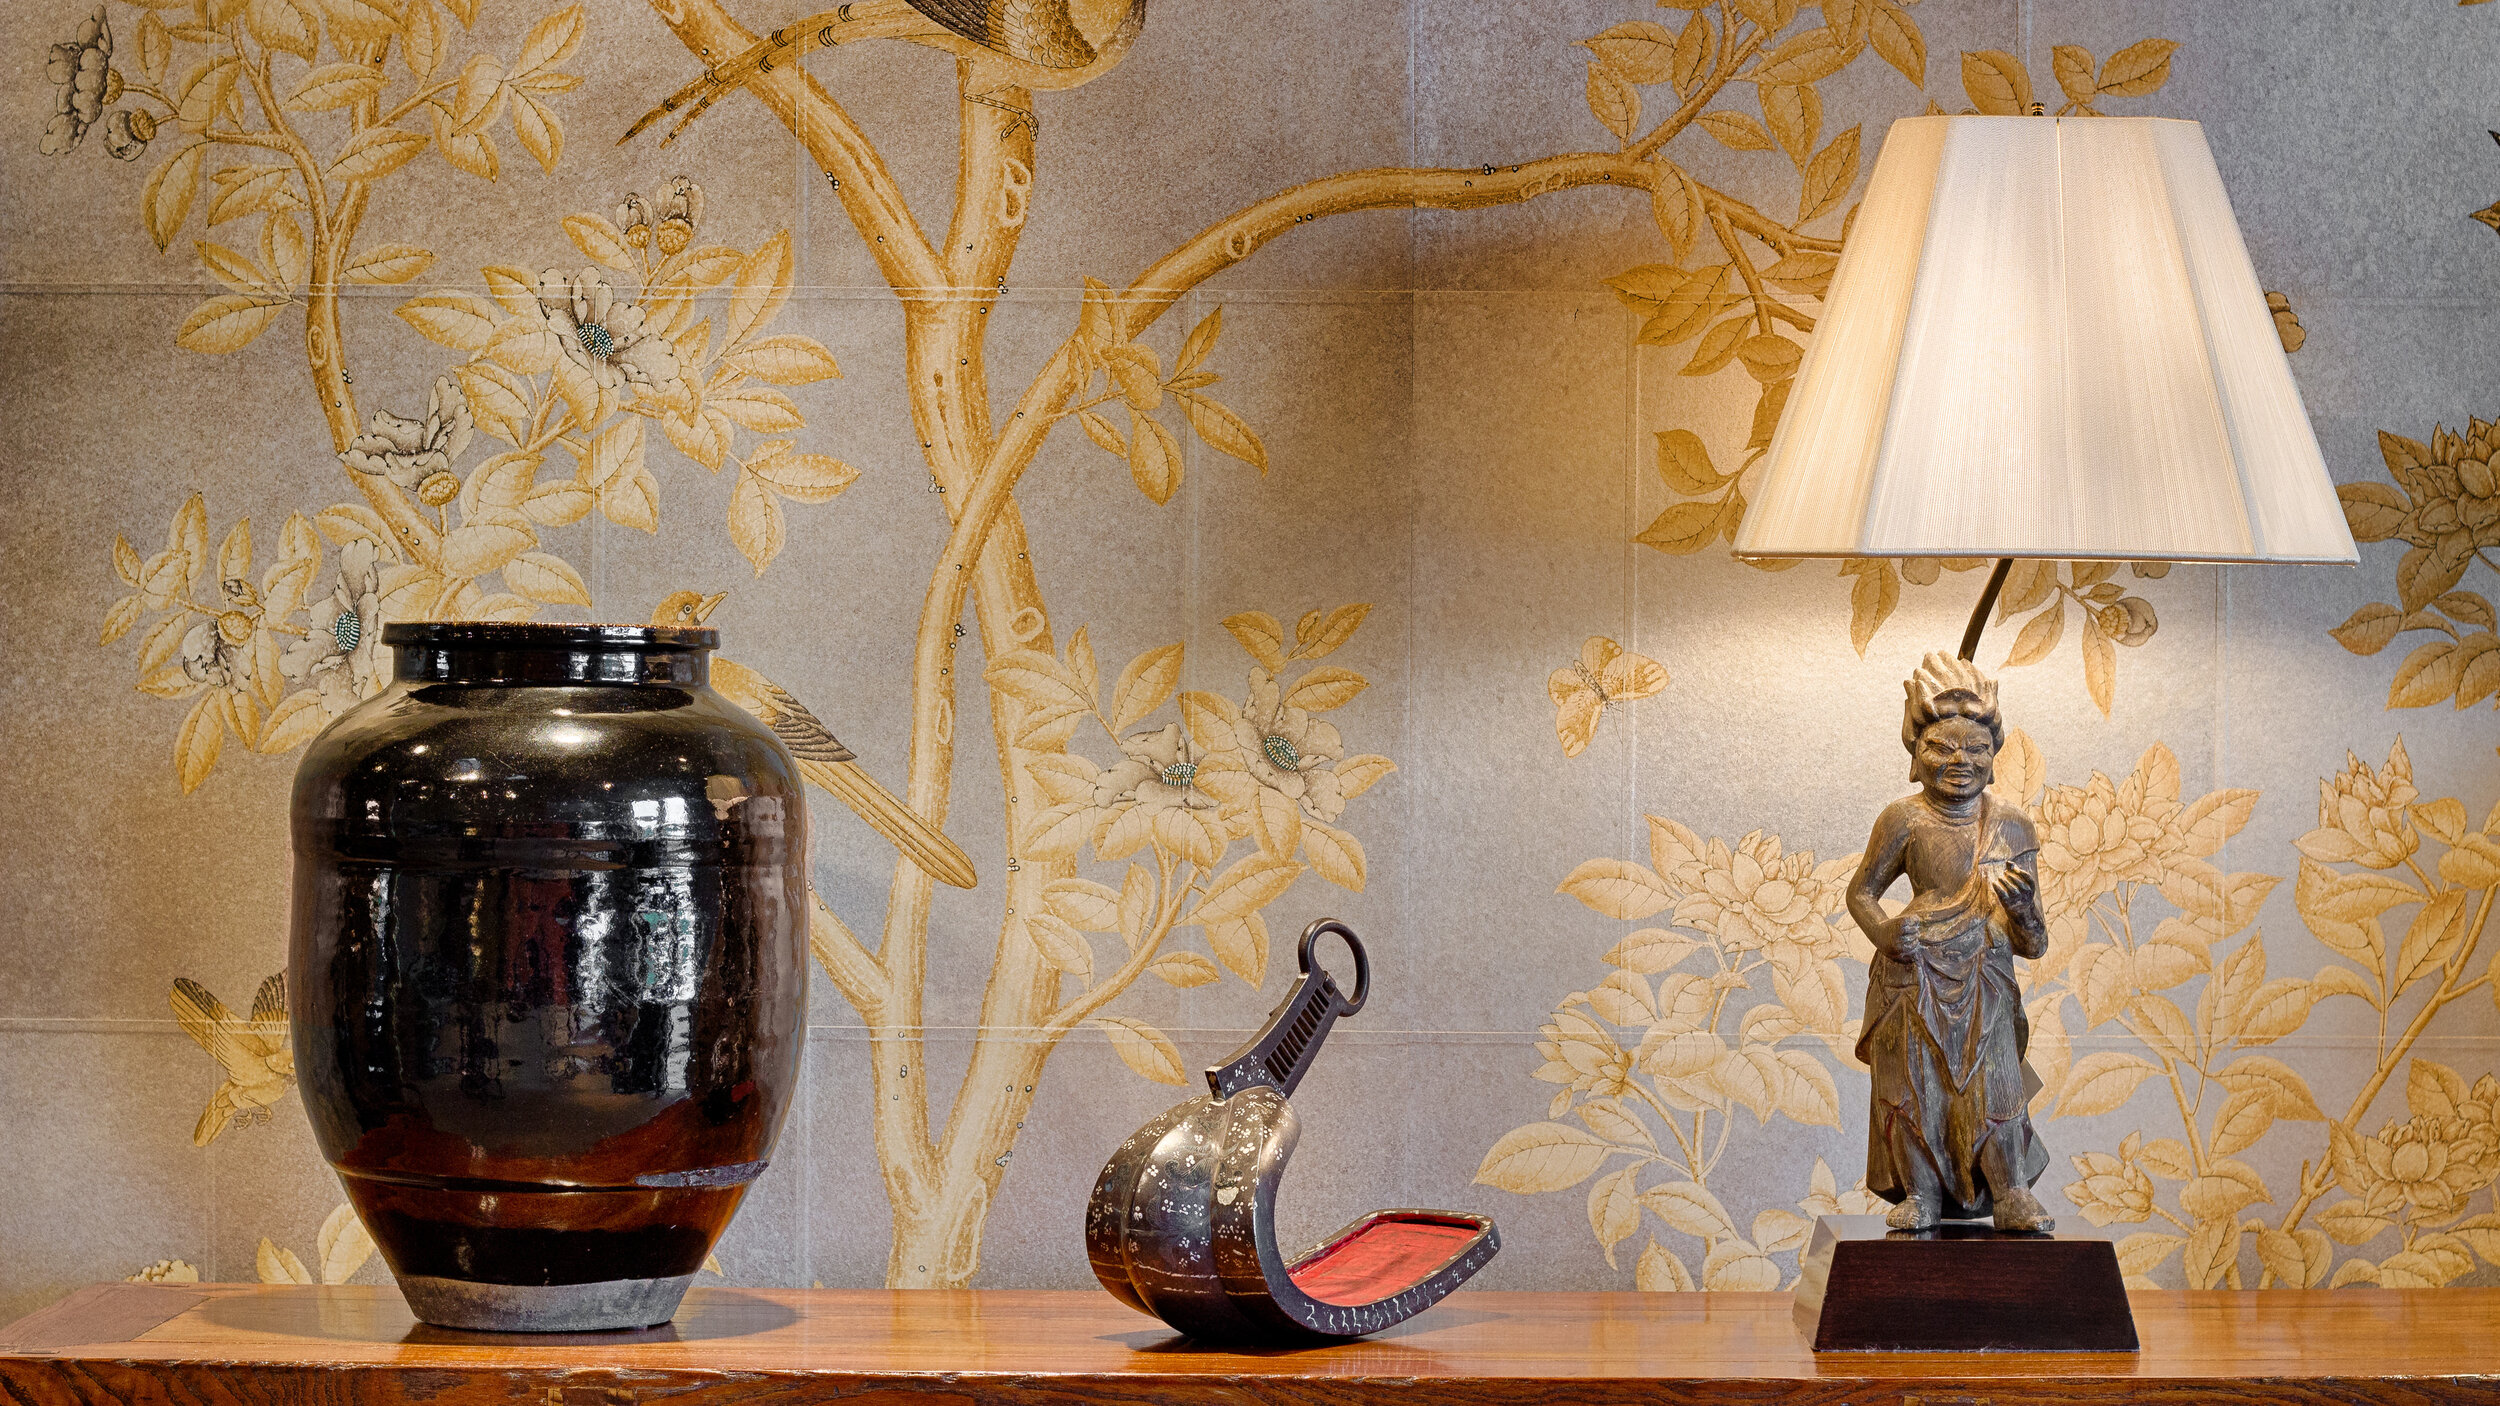 Gracie wallpaper  Hand painted wallpaper Gracie wallpaper Chinoiserie  wallpaper